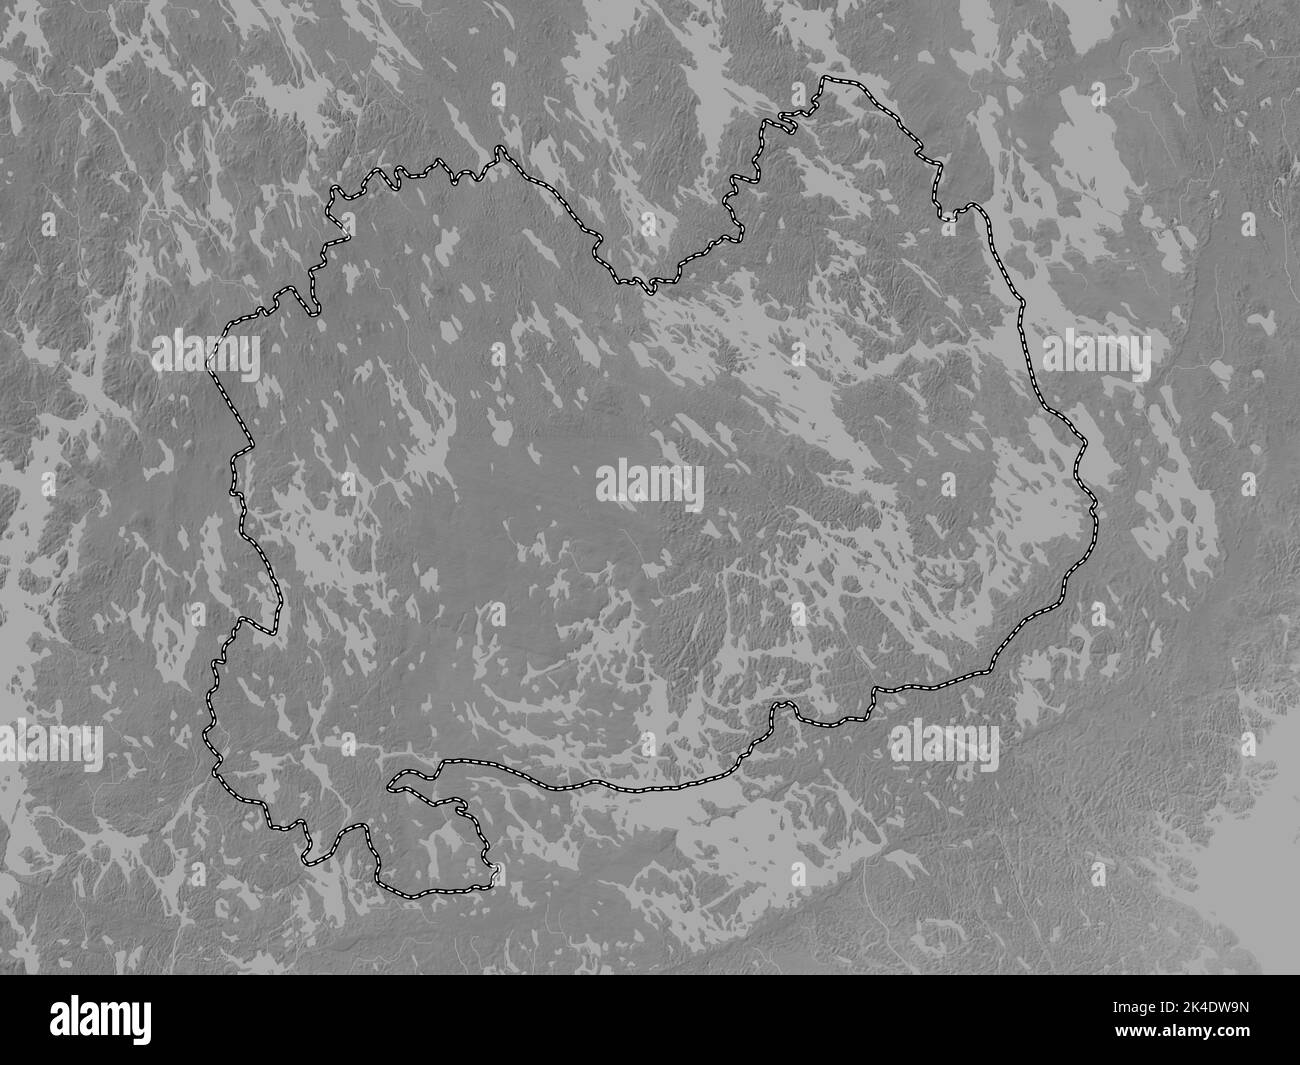 Southern Savonia, region of Finland. Grayscale elevation map with lakes and rivers Stock Photo